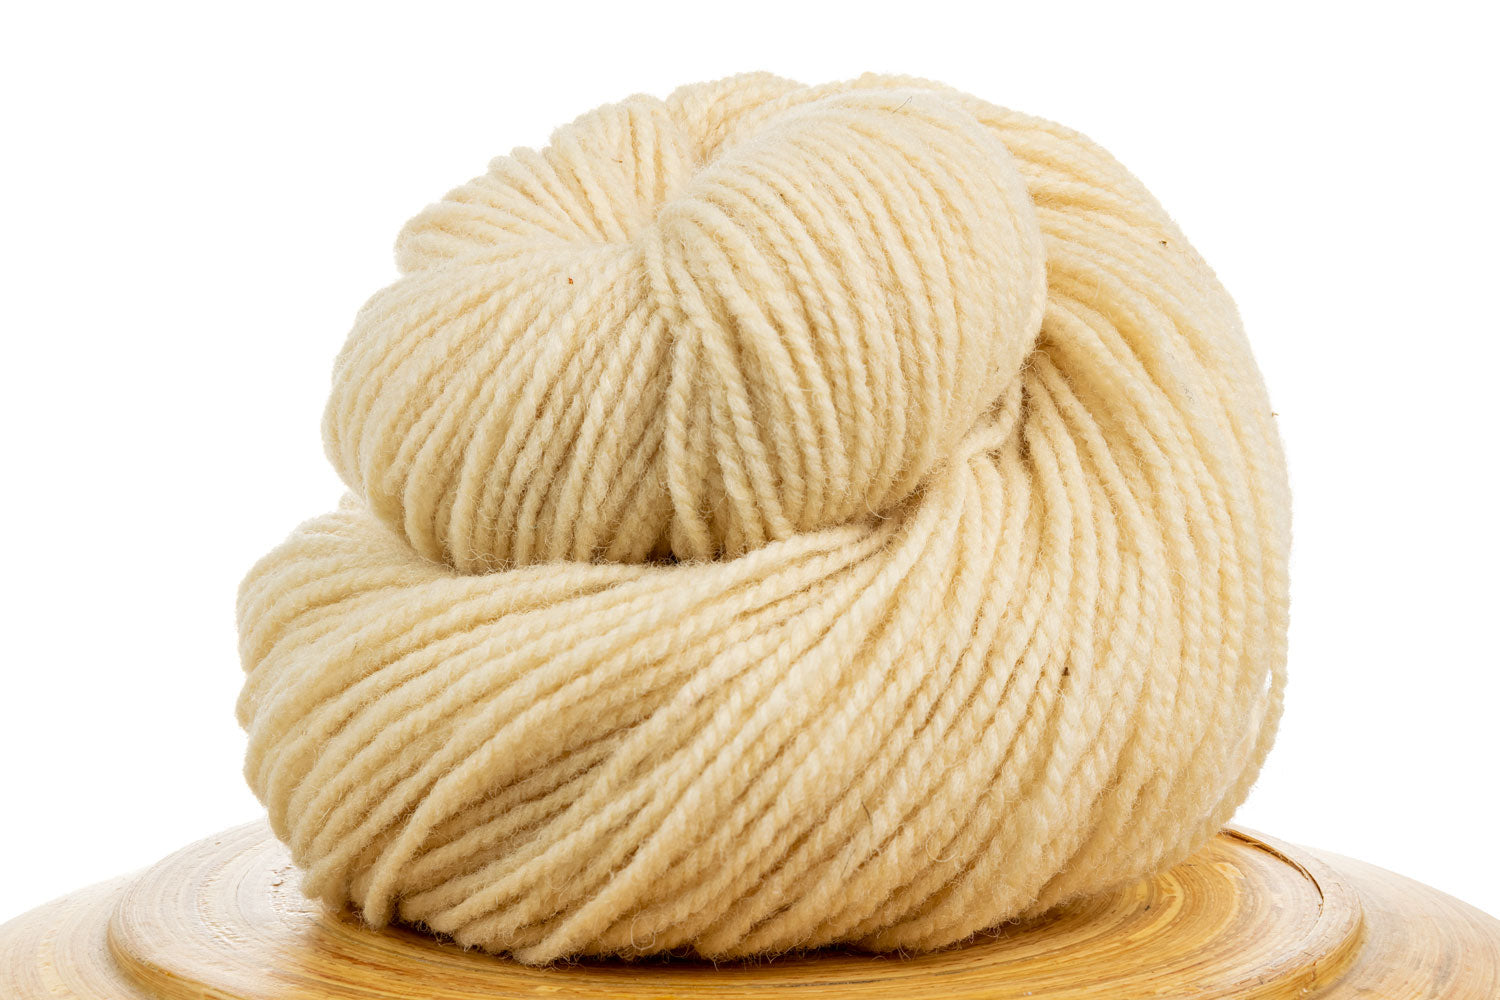 Winfield Canadian hand-dyed wool yarn in Natural, natural cream-coloured wool